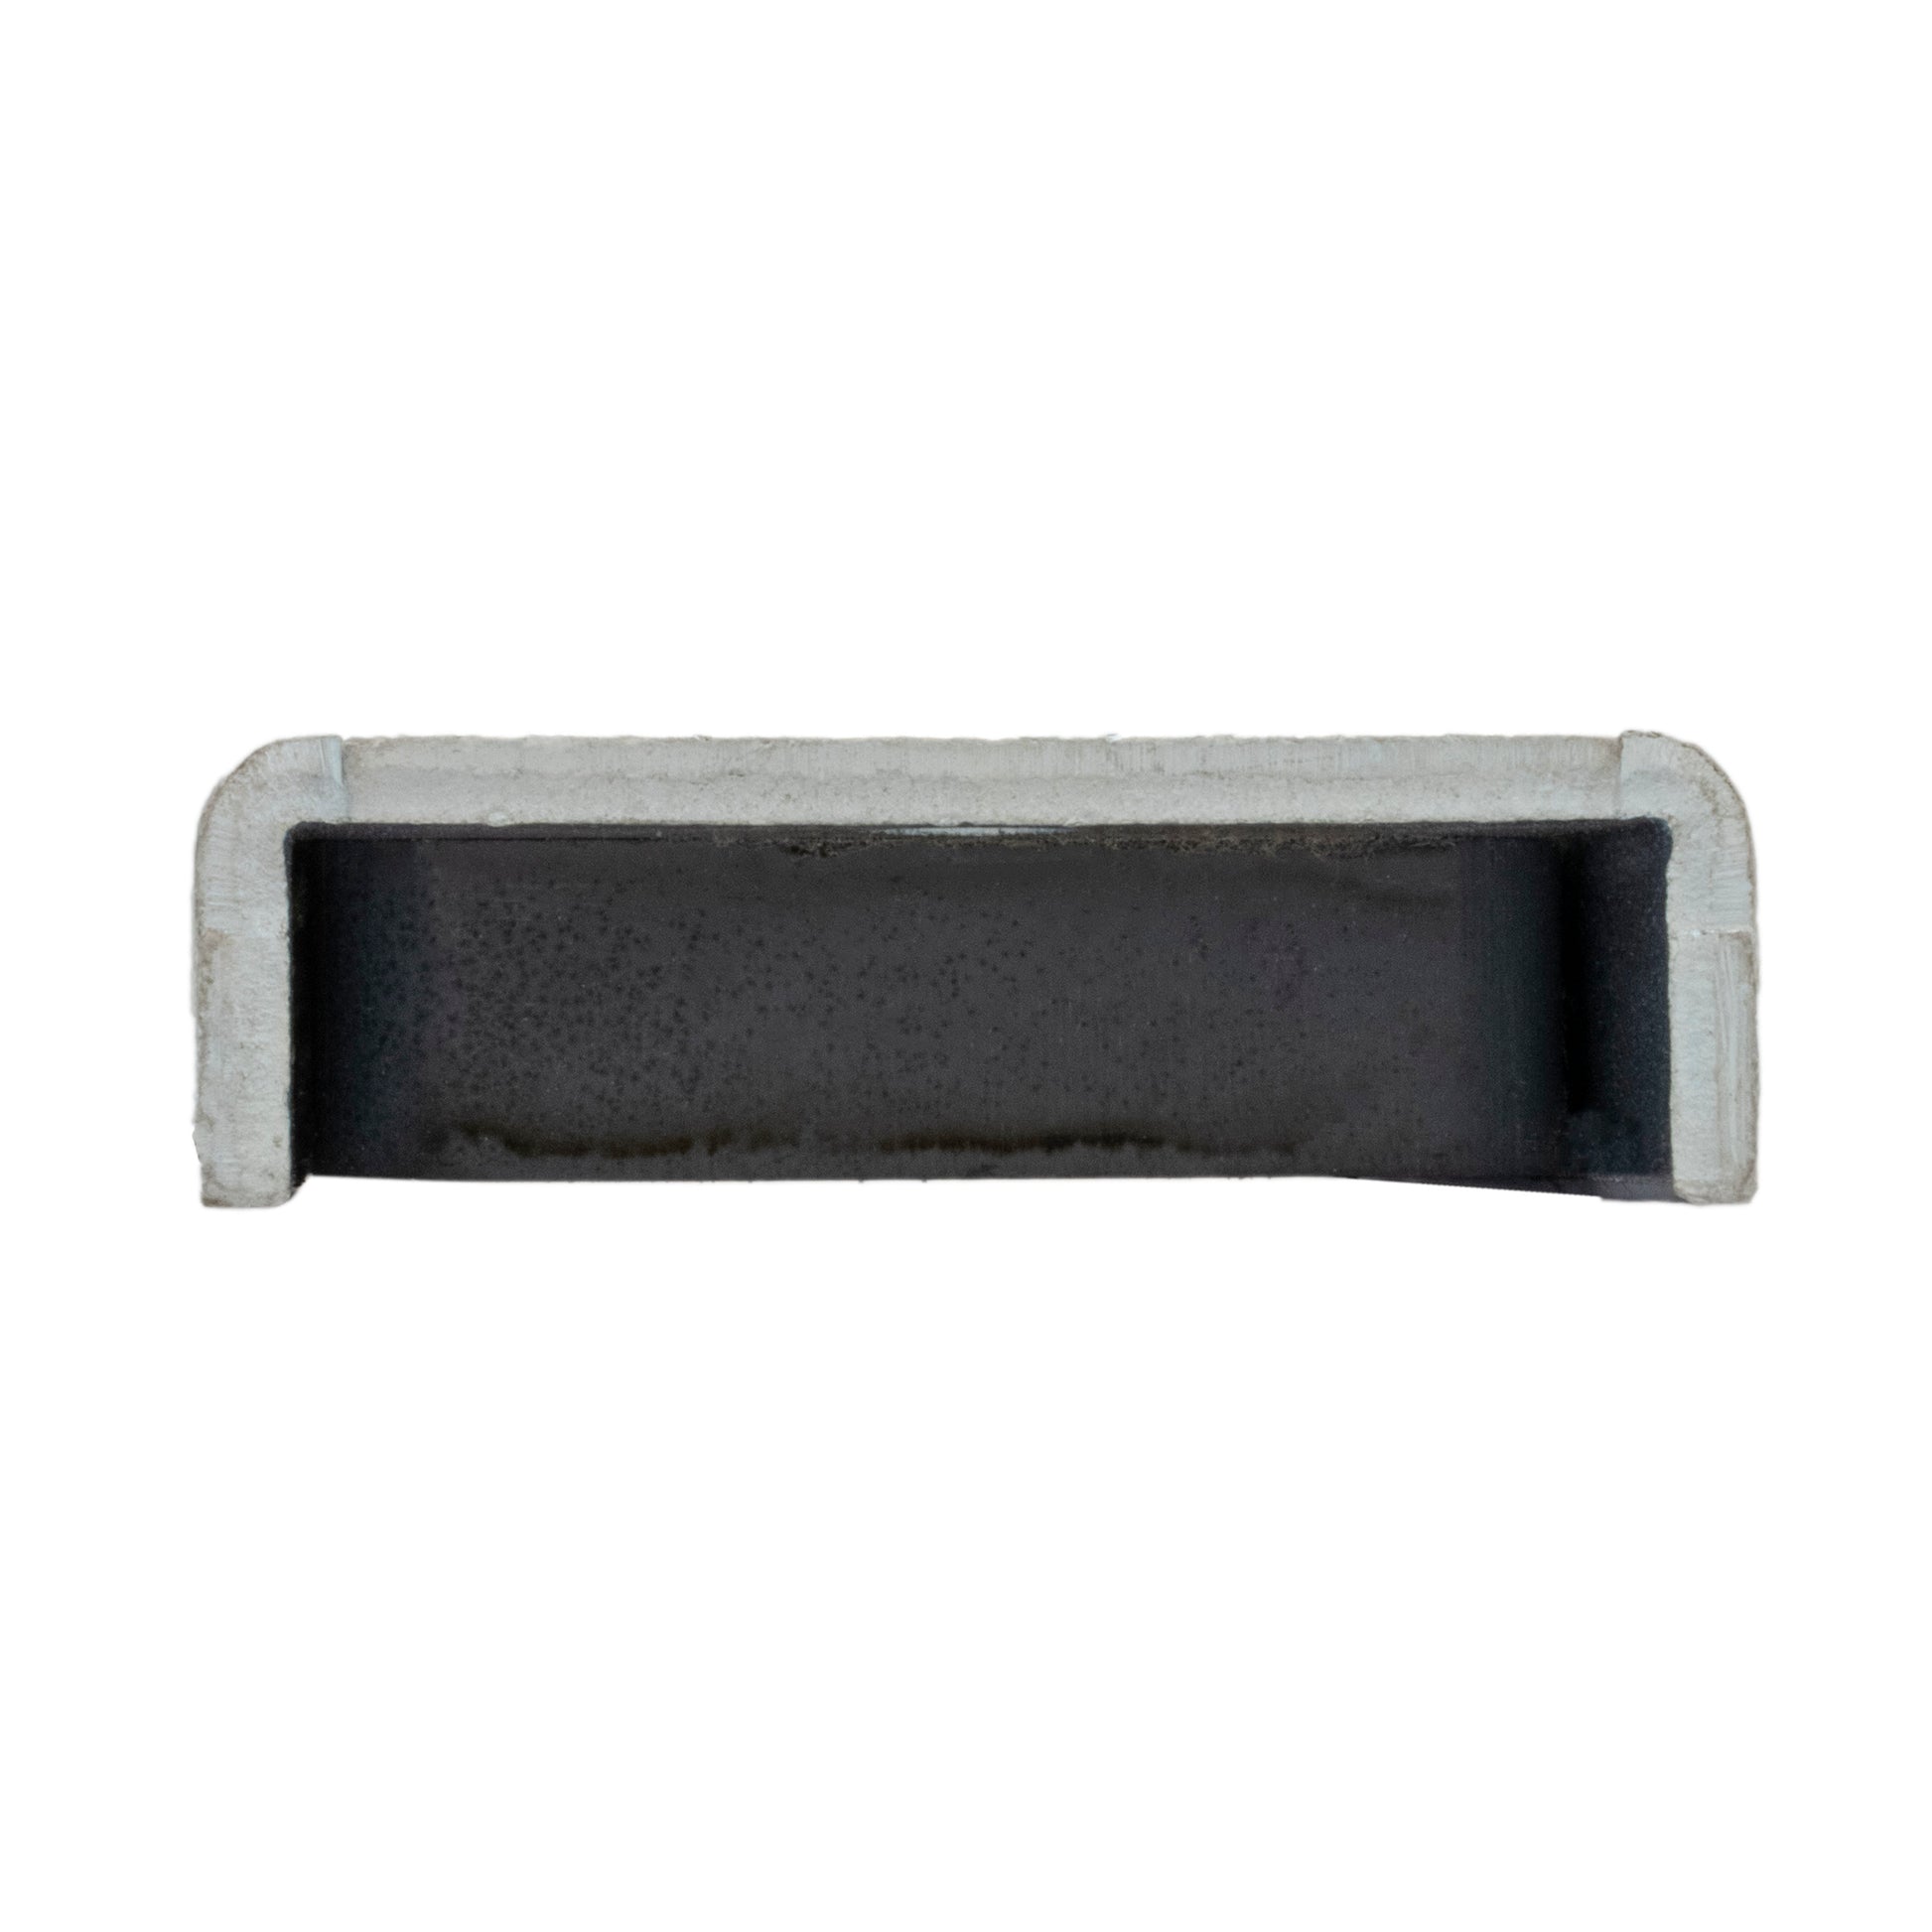 Load image into Gallery viewer, CBA300 Ceramic Latch Magnet Channel Assembly - Bottom View